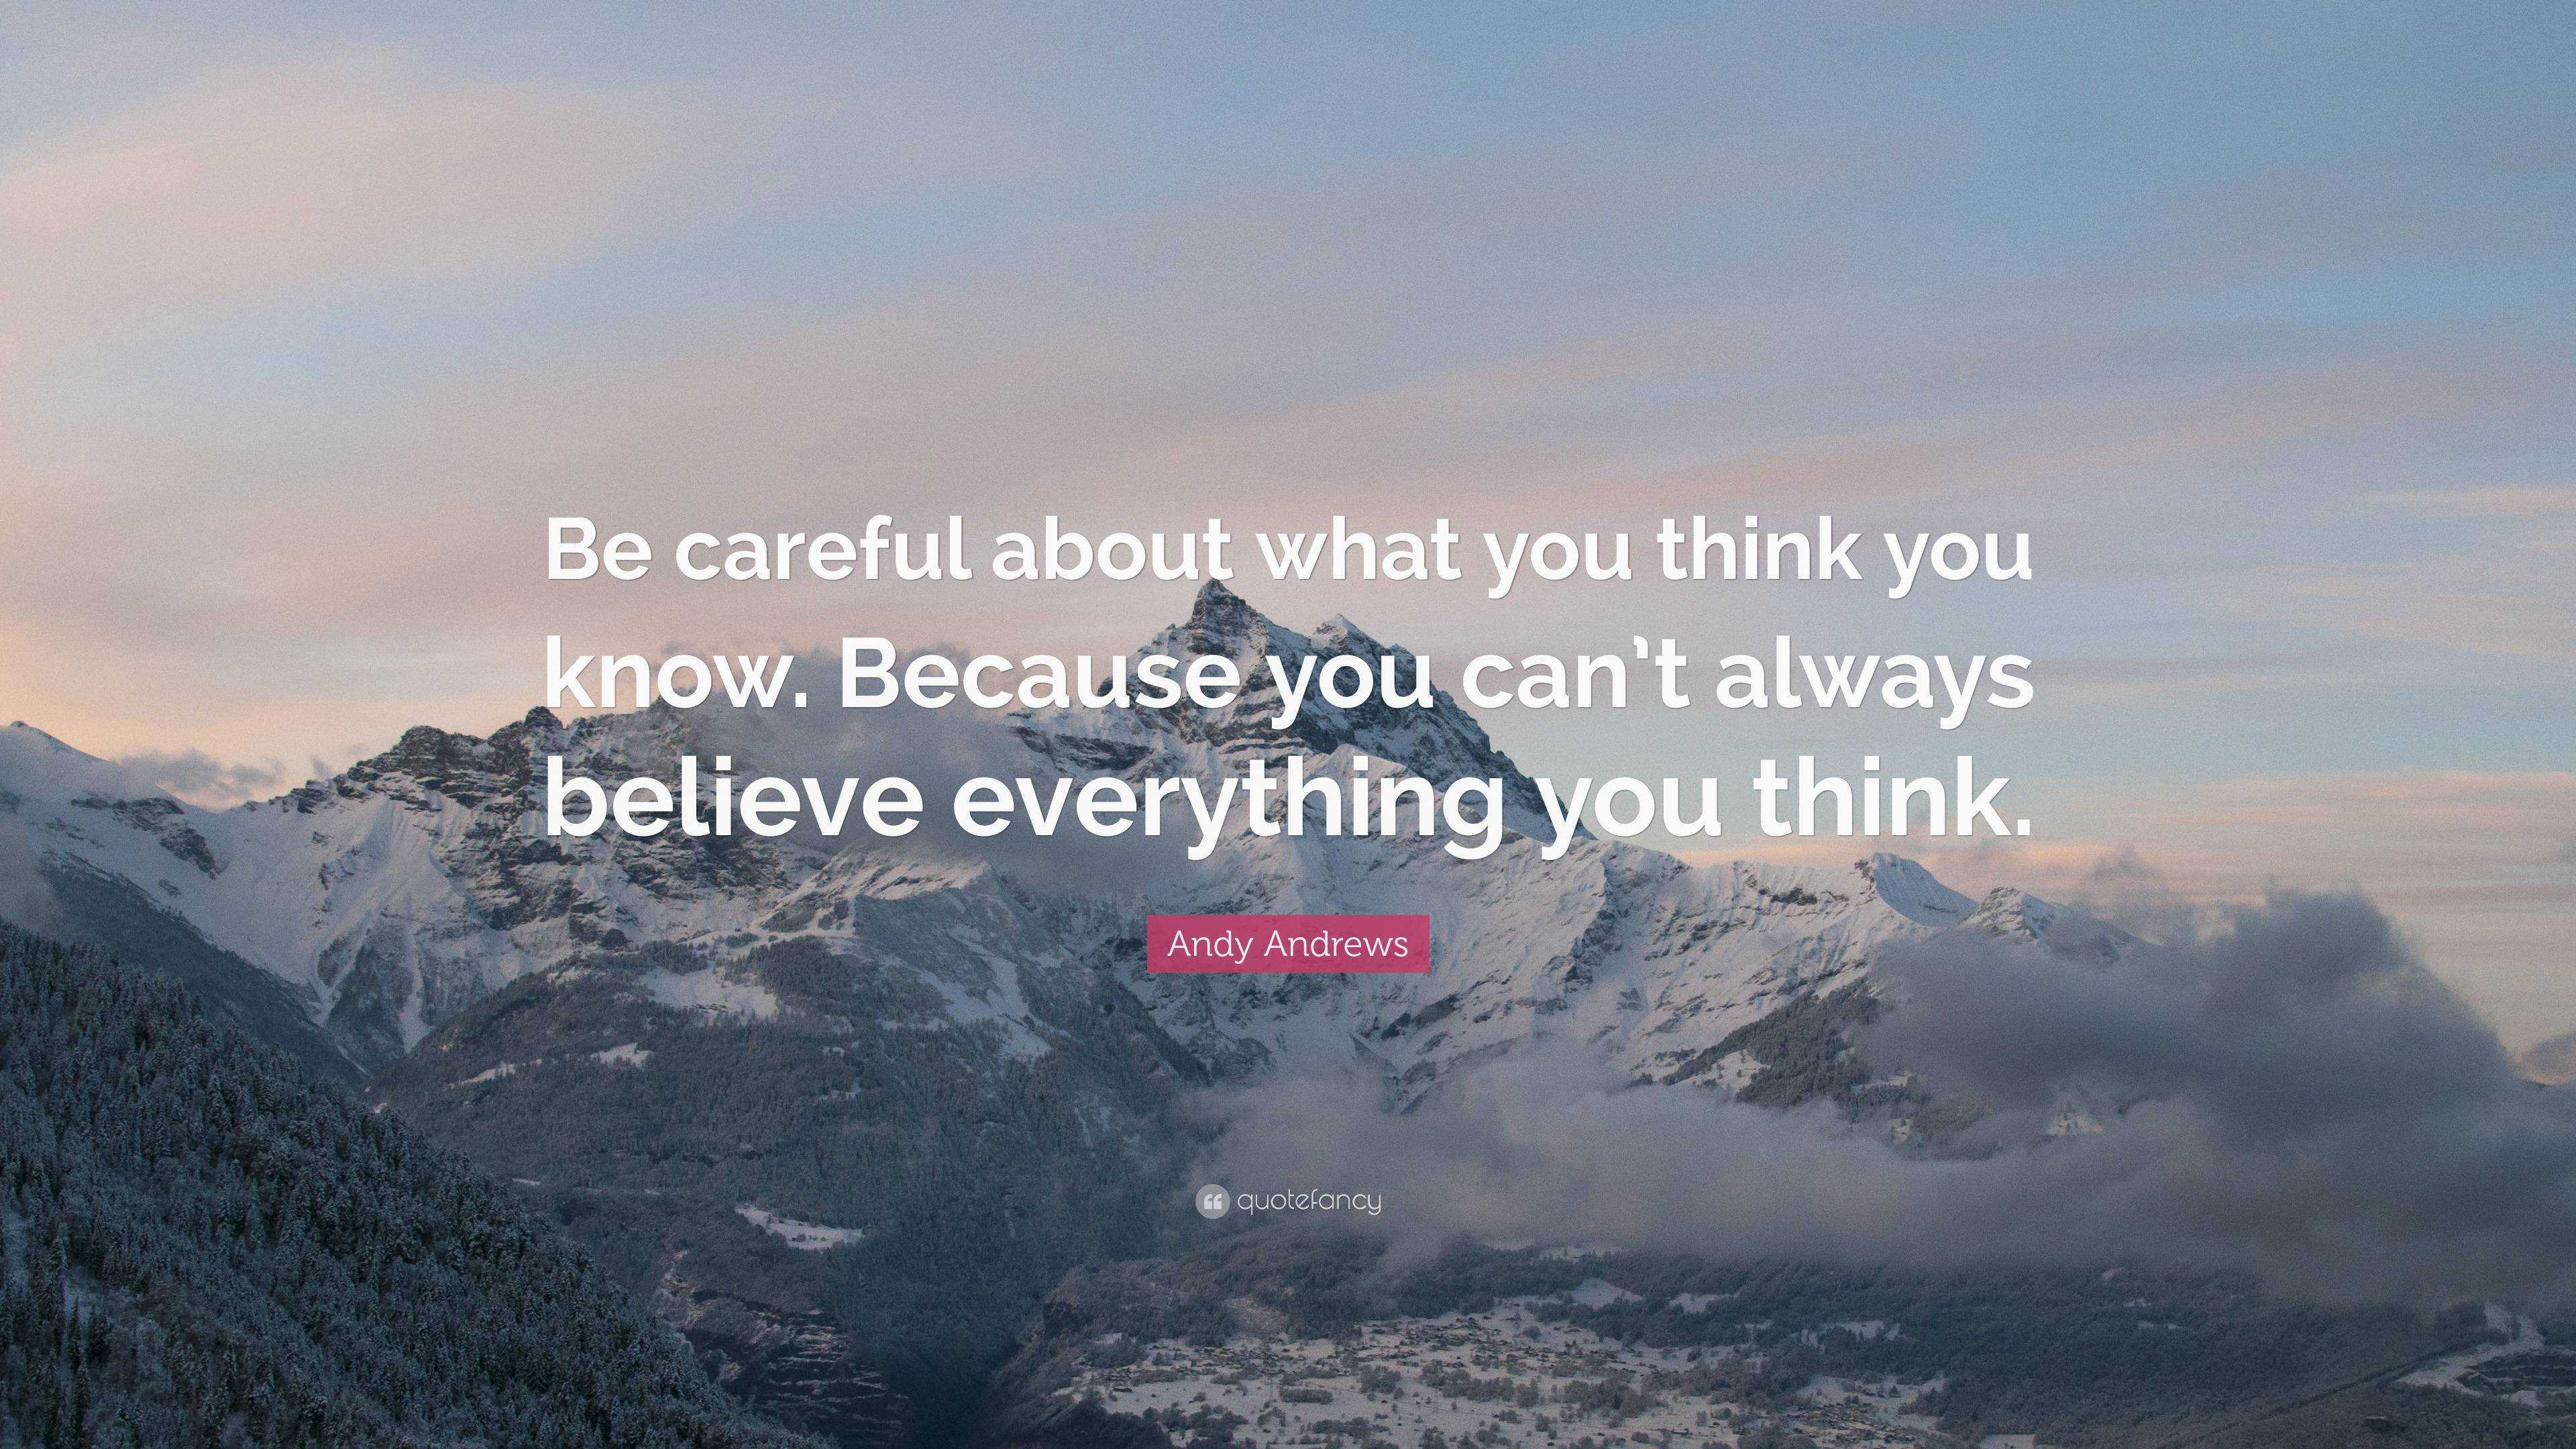 Andy Andrews Quote: “Be careful about what you think you know. Because ...